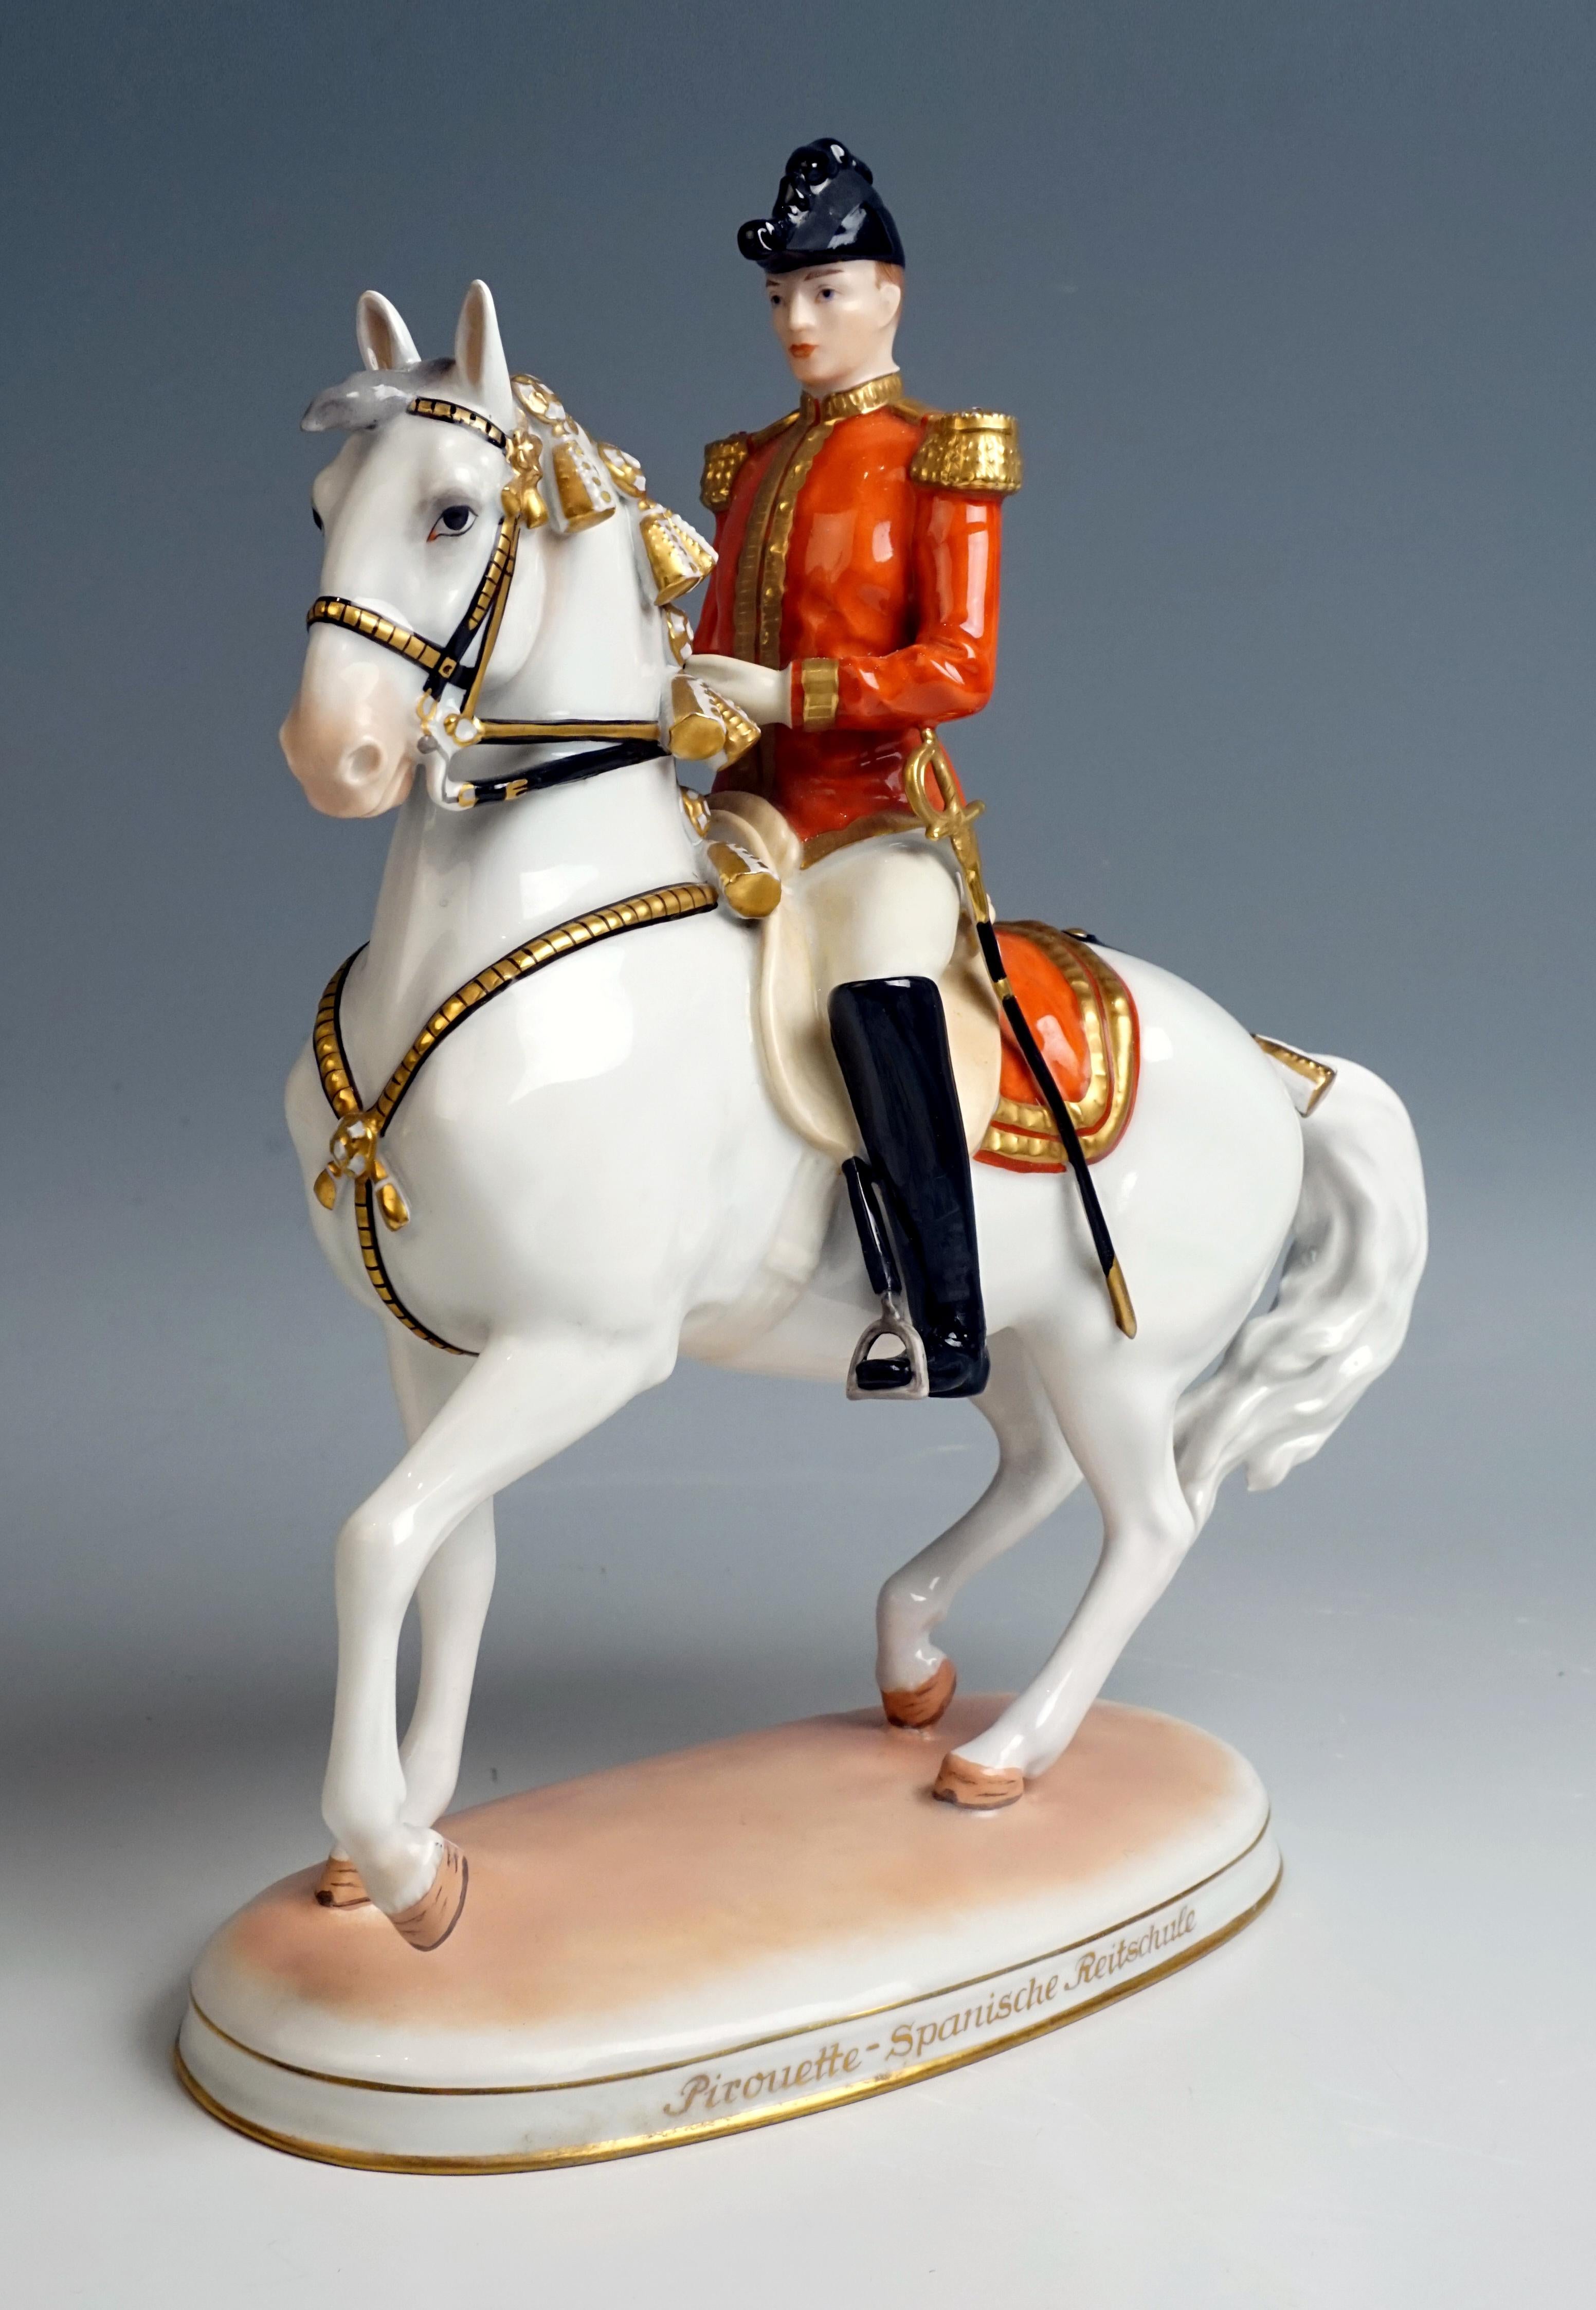 Vienna Augarten Horse Spanish Riding School
Figure type: 'Pirouette'

The seated rider leads the striding horse with the reins; he has a sword attached to his side, the rider's red jacket is decorated with a gold button hem and epaulets. The